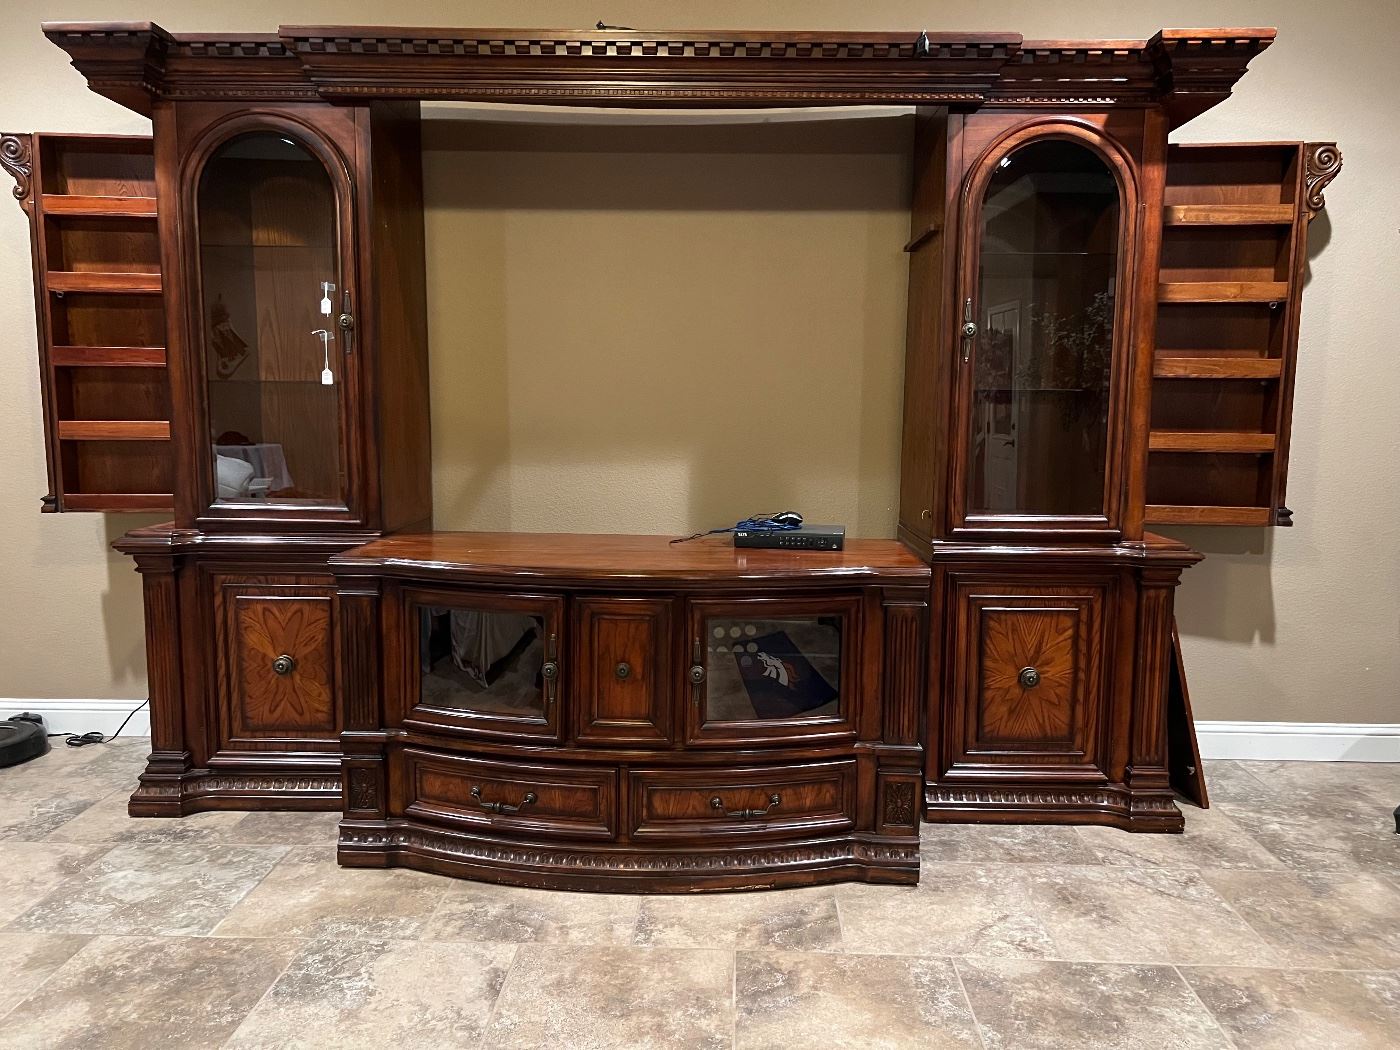 Entertainment center with tons of storage!